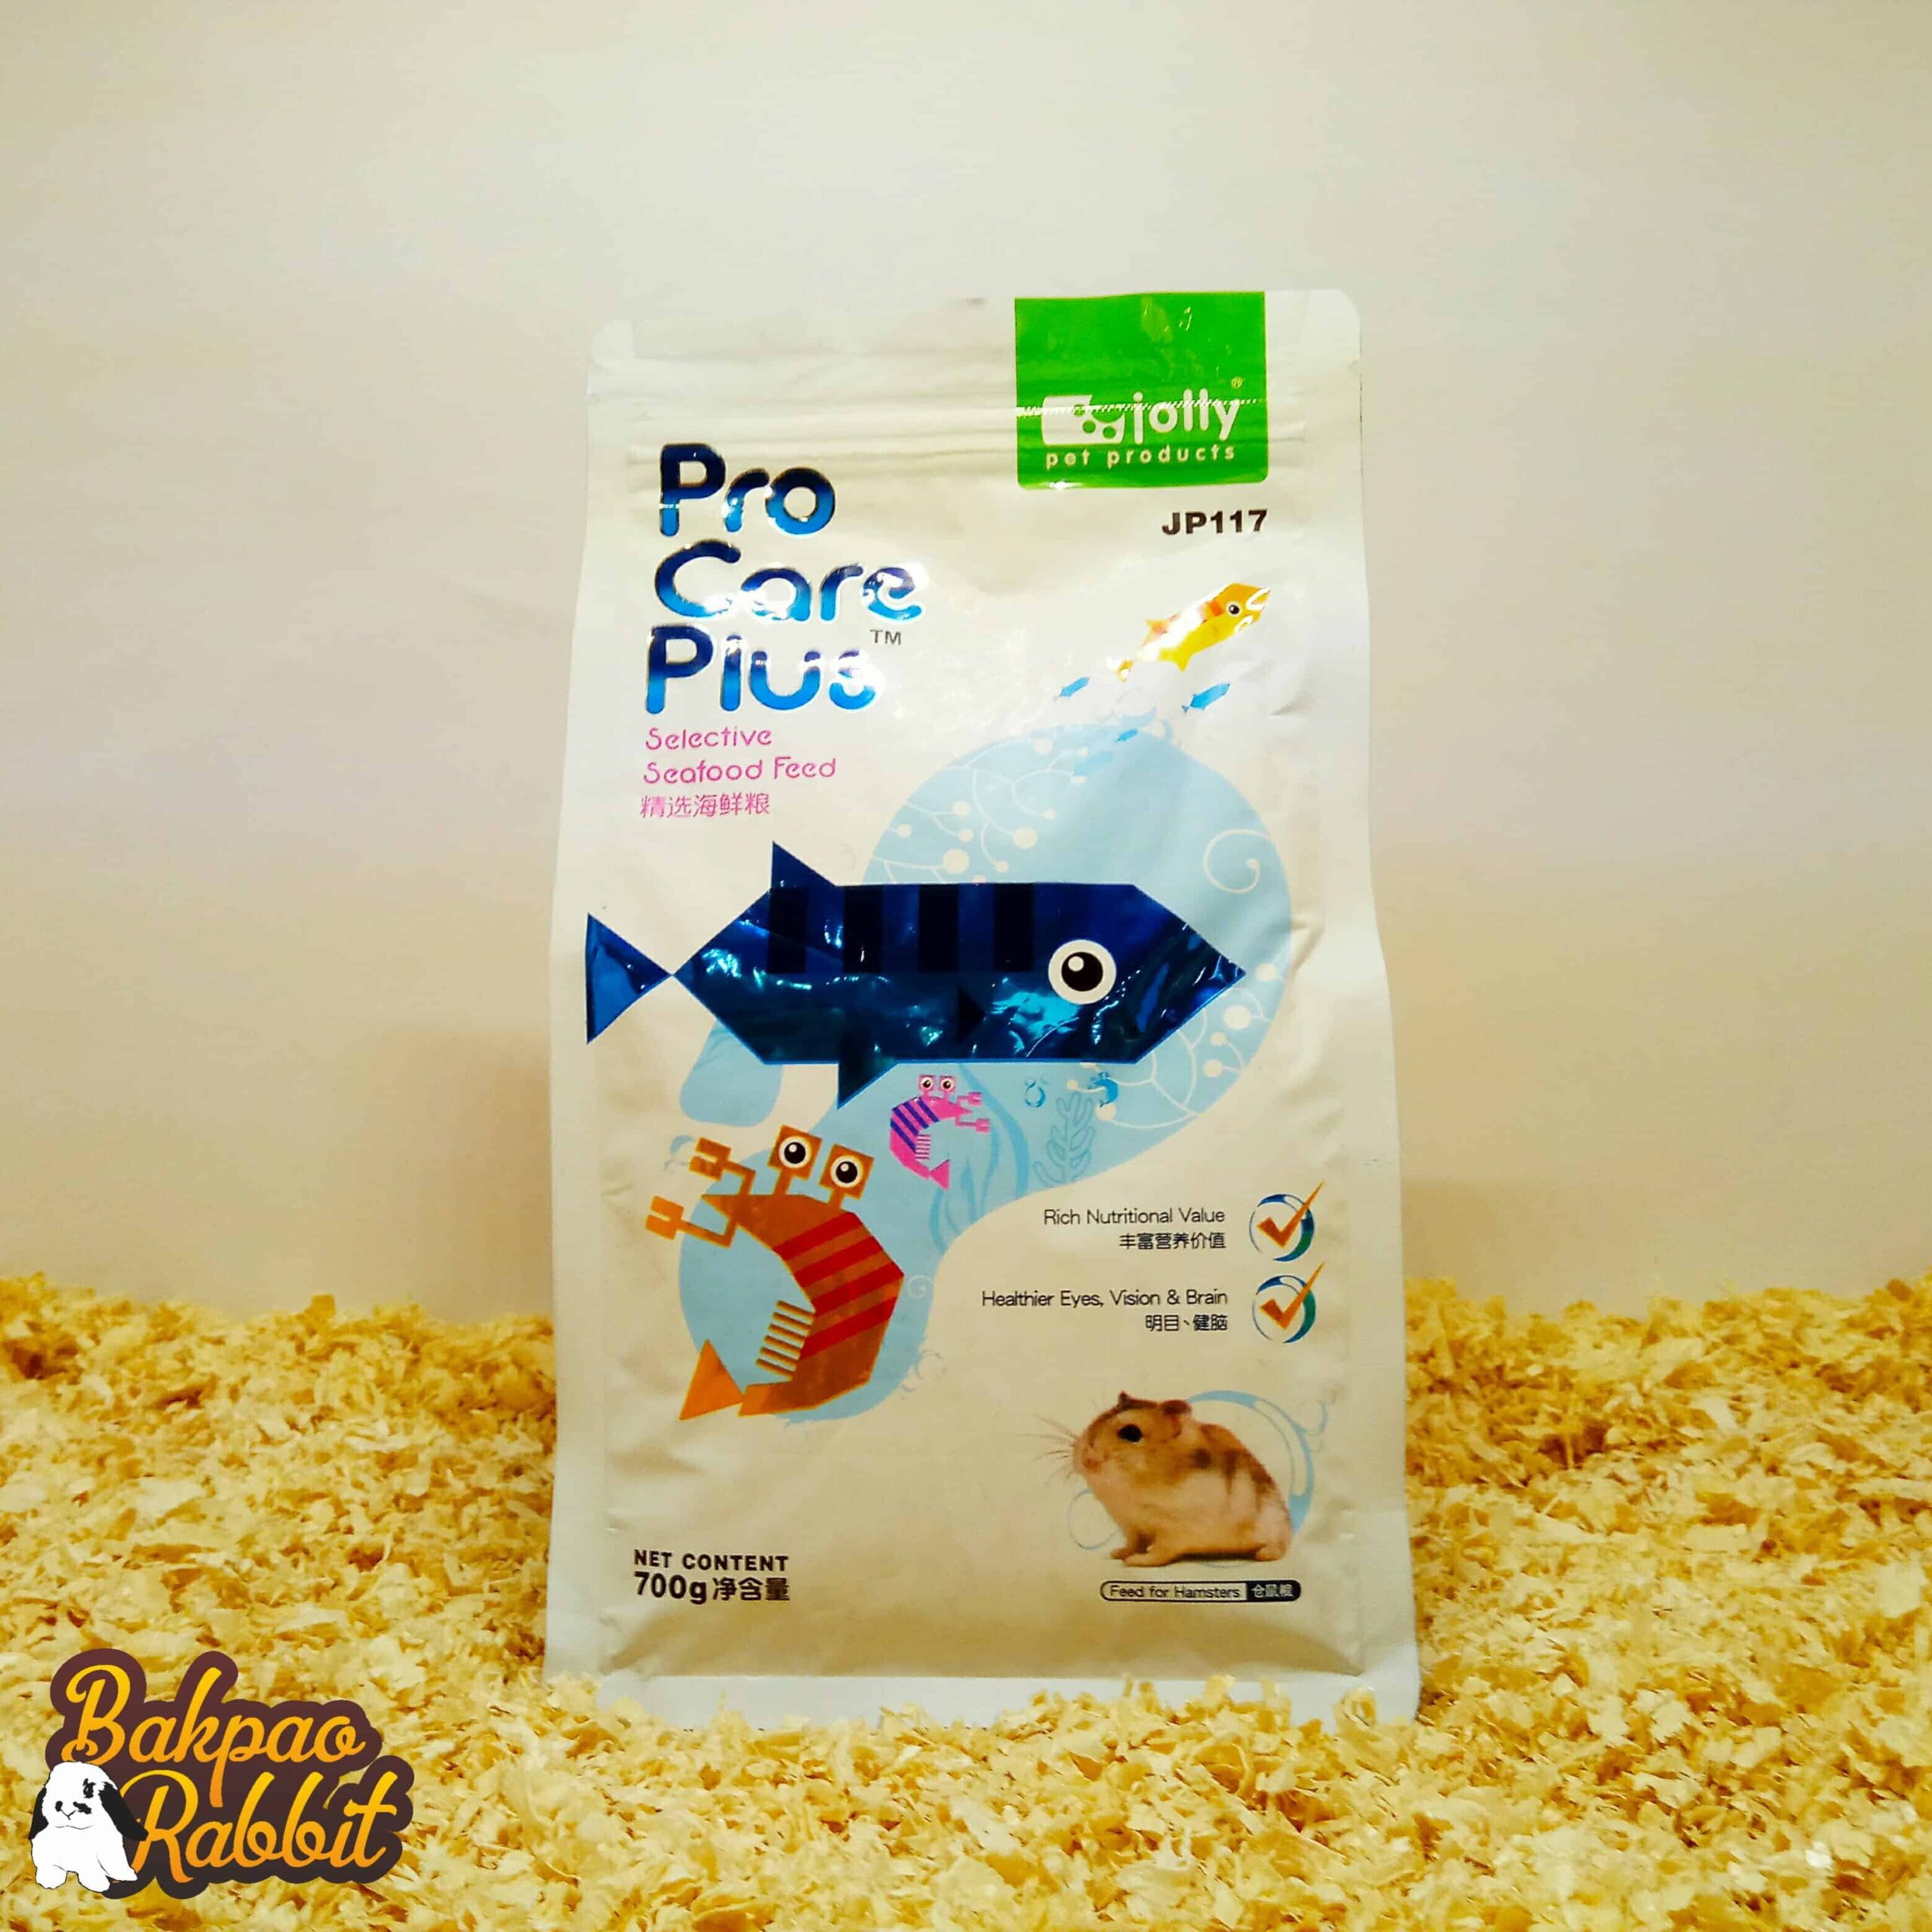 Jolly JP117 Pro Care Plus Selective Seafood Feed 700g